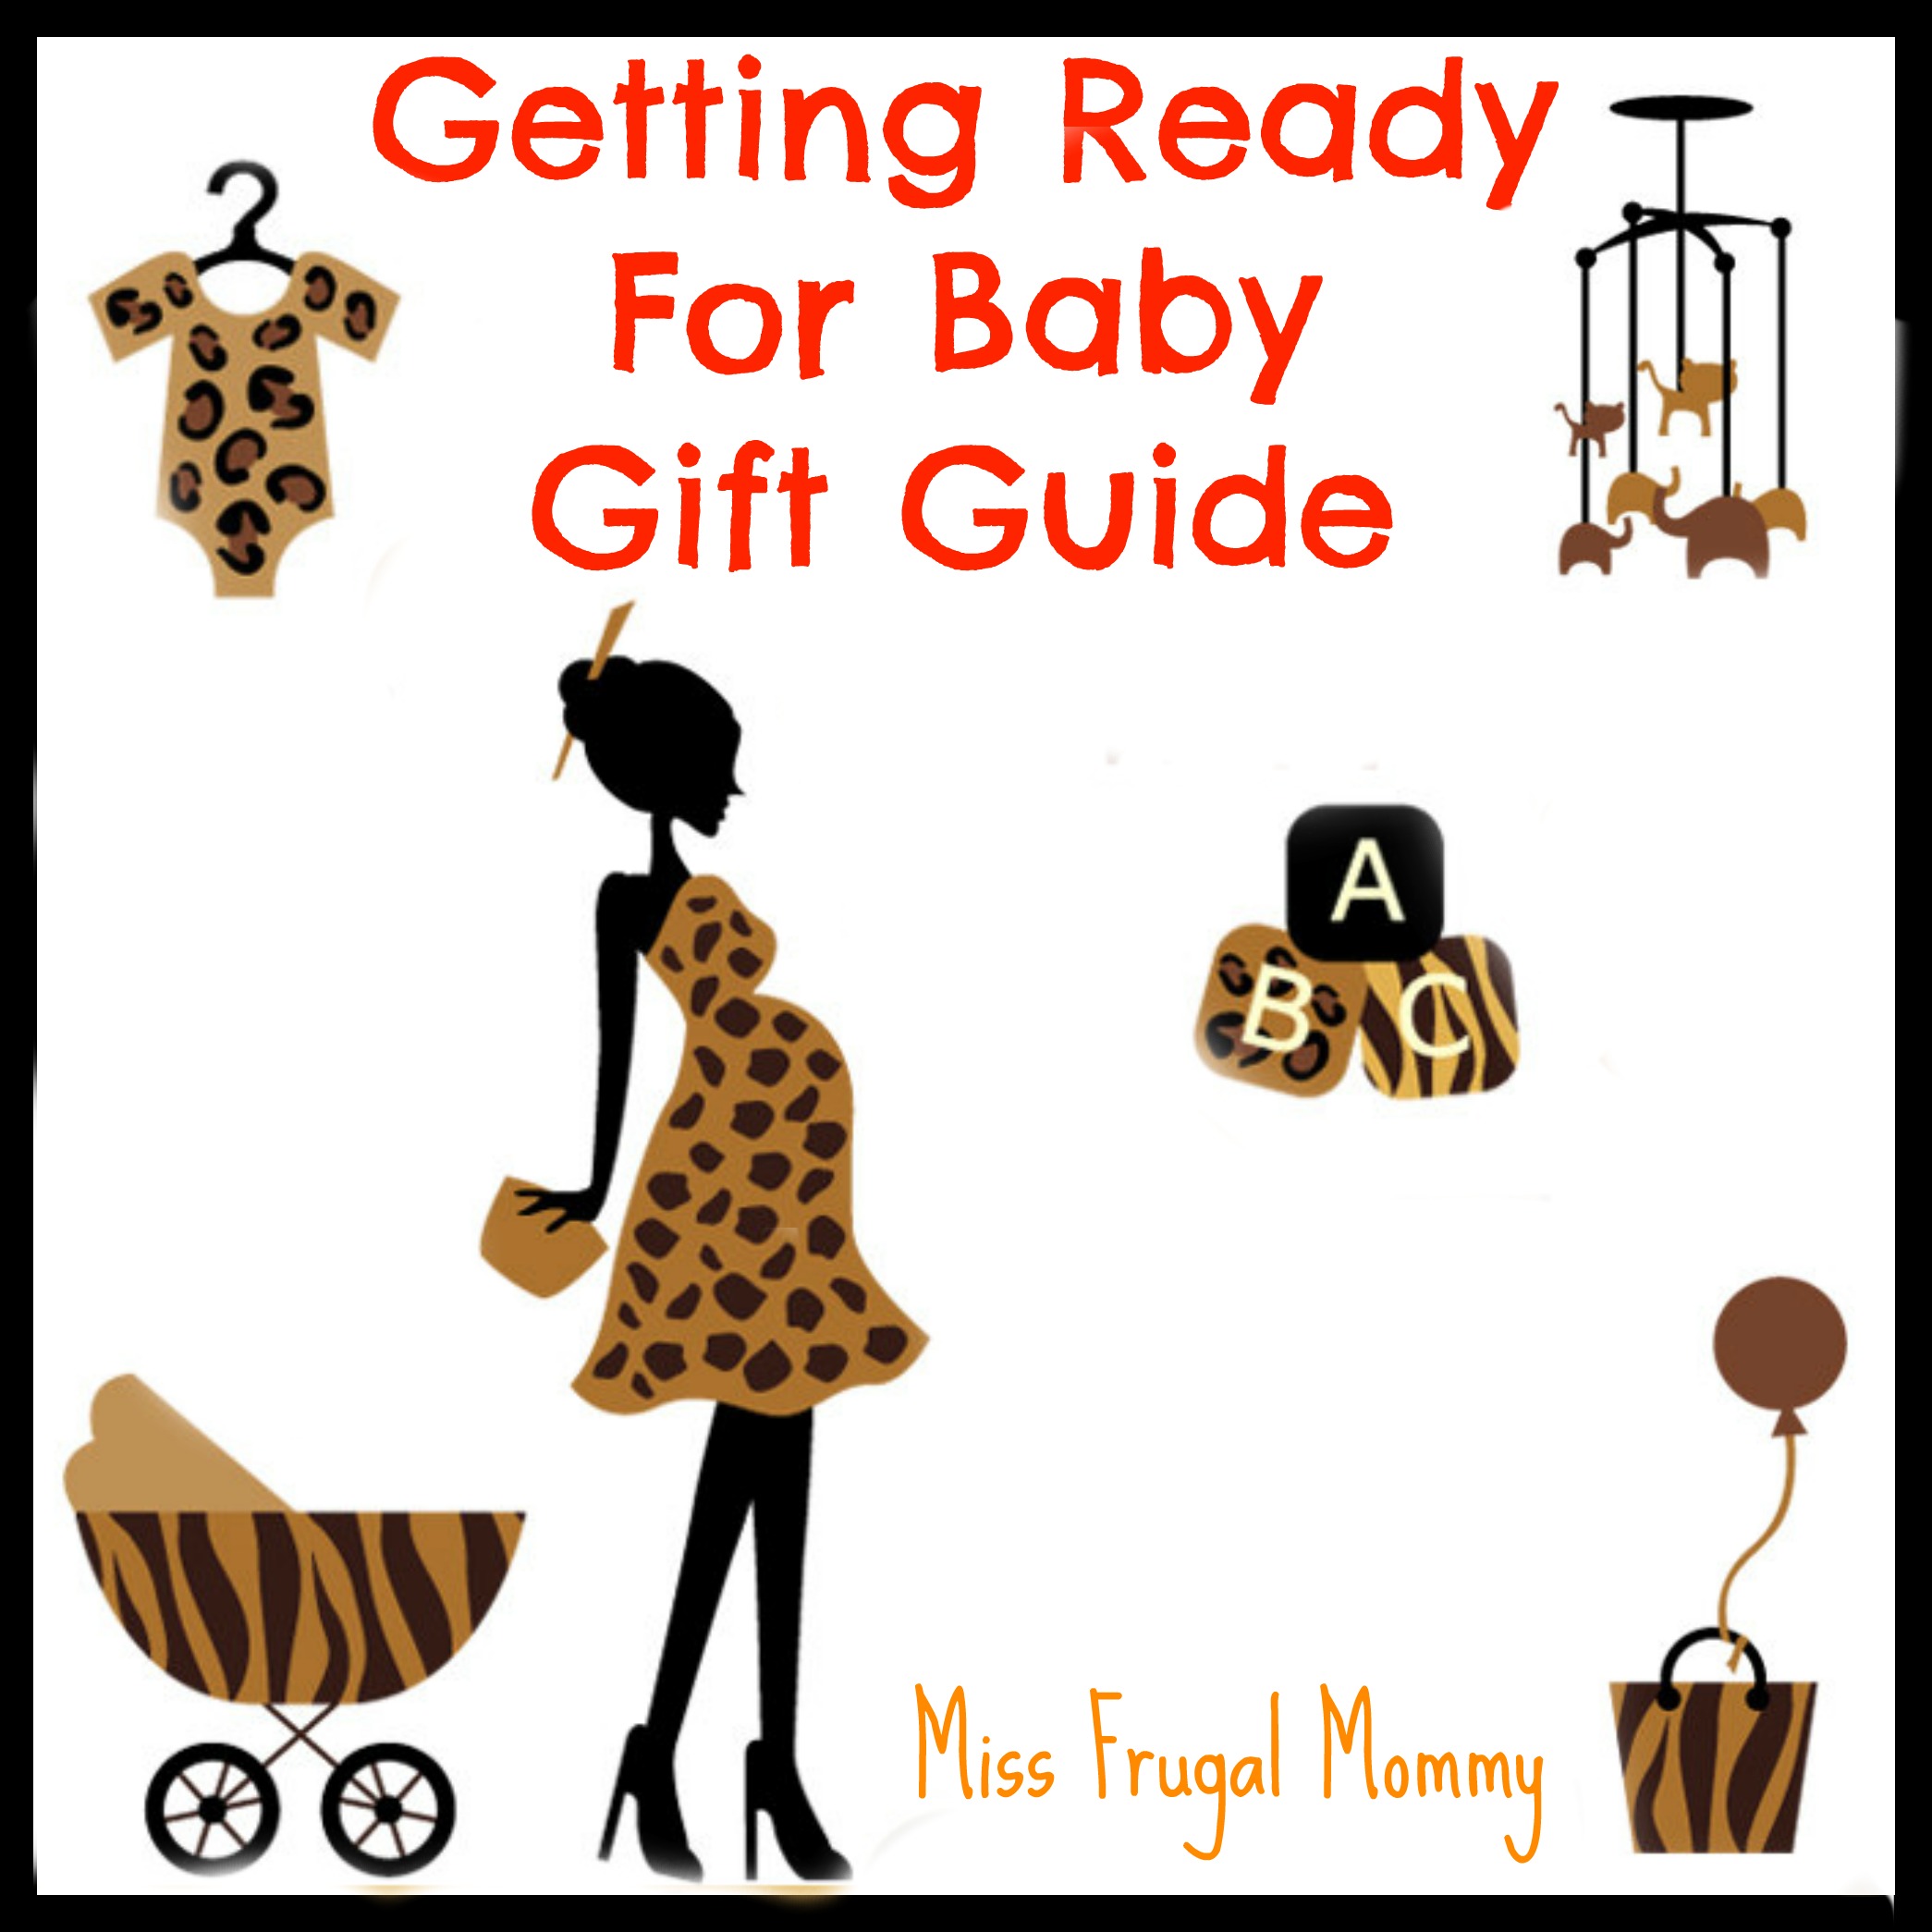 Getting Ready For Baby Gift Guide